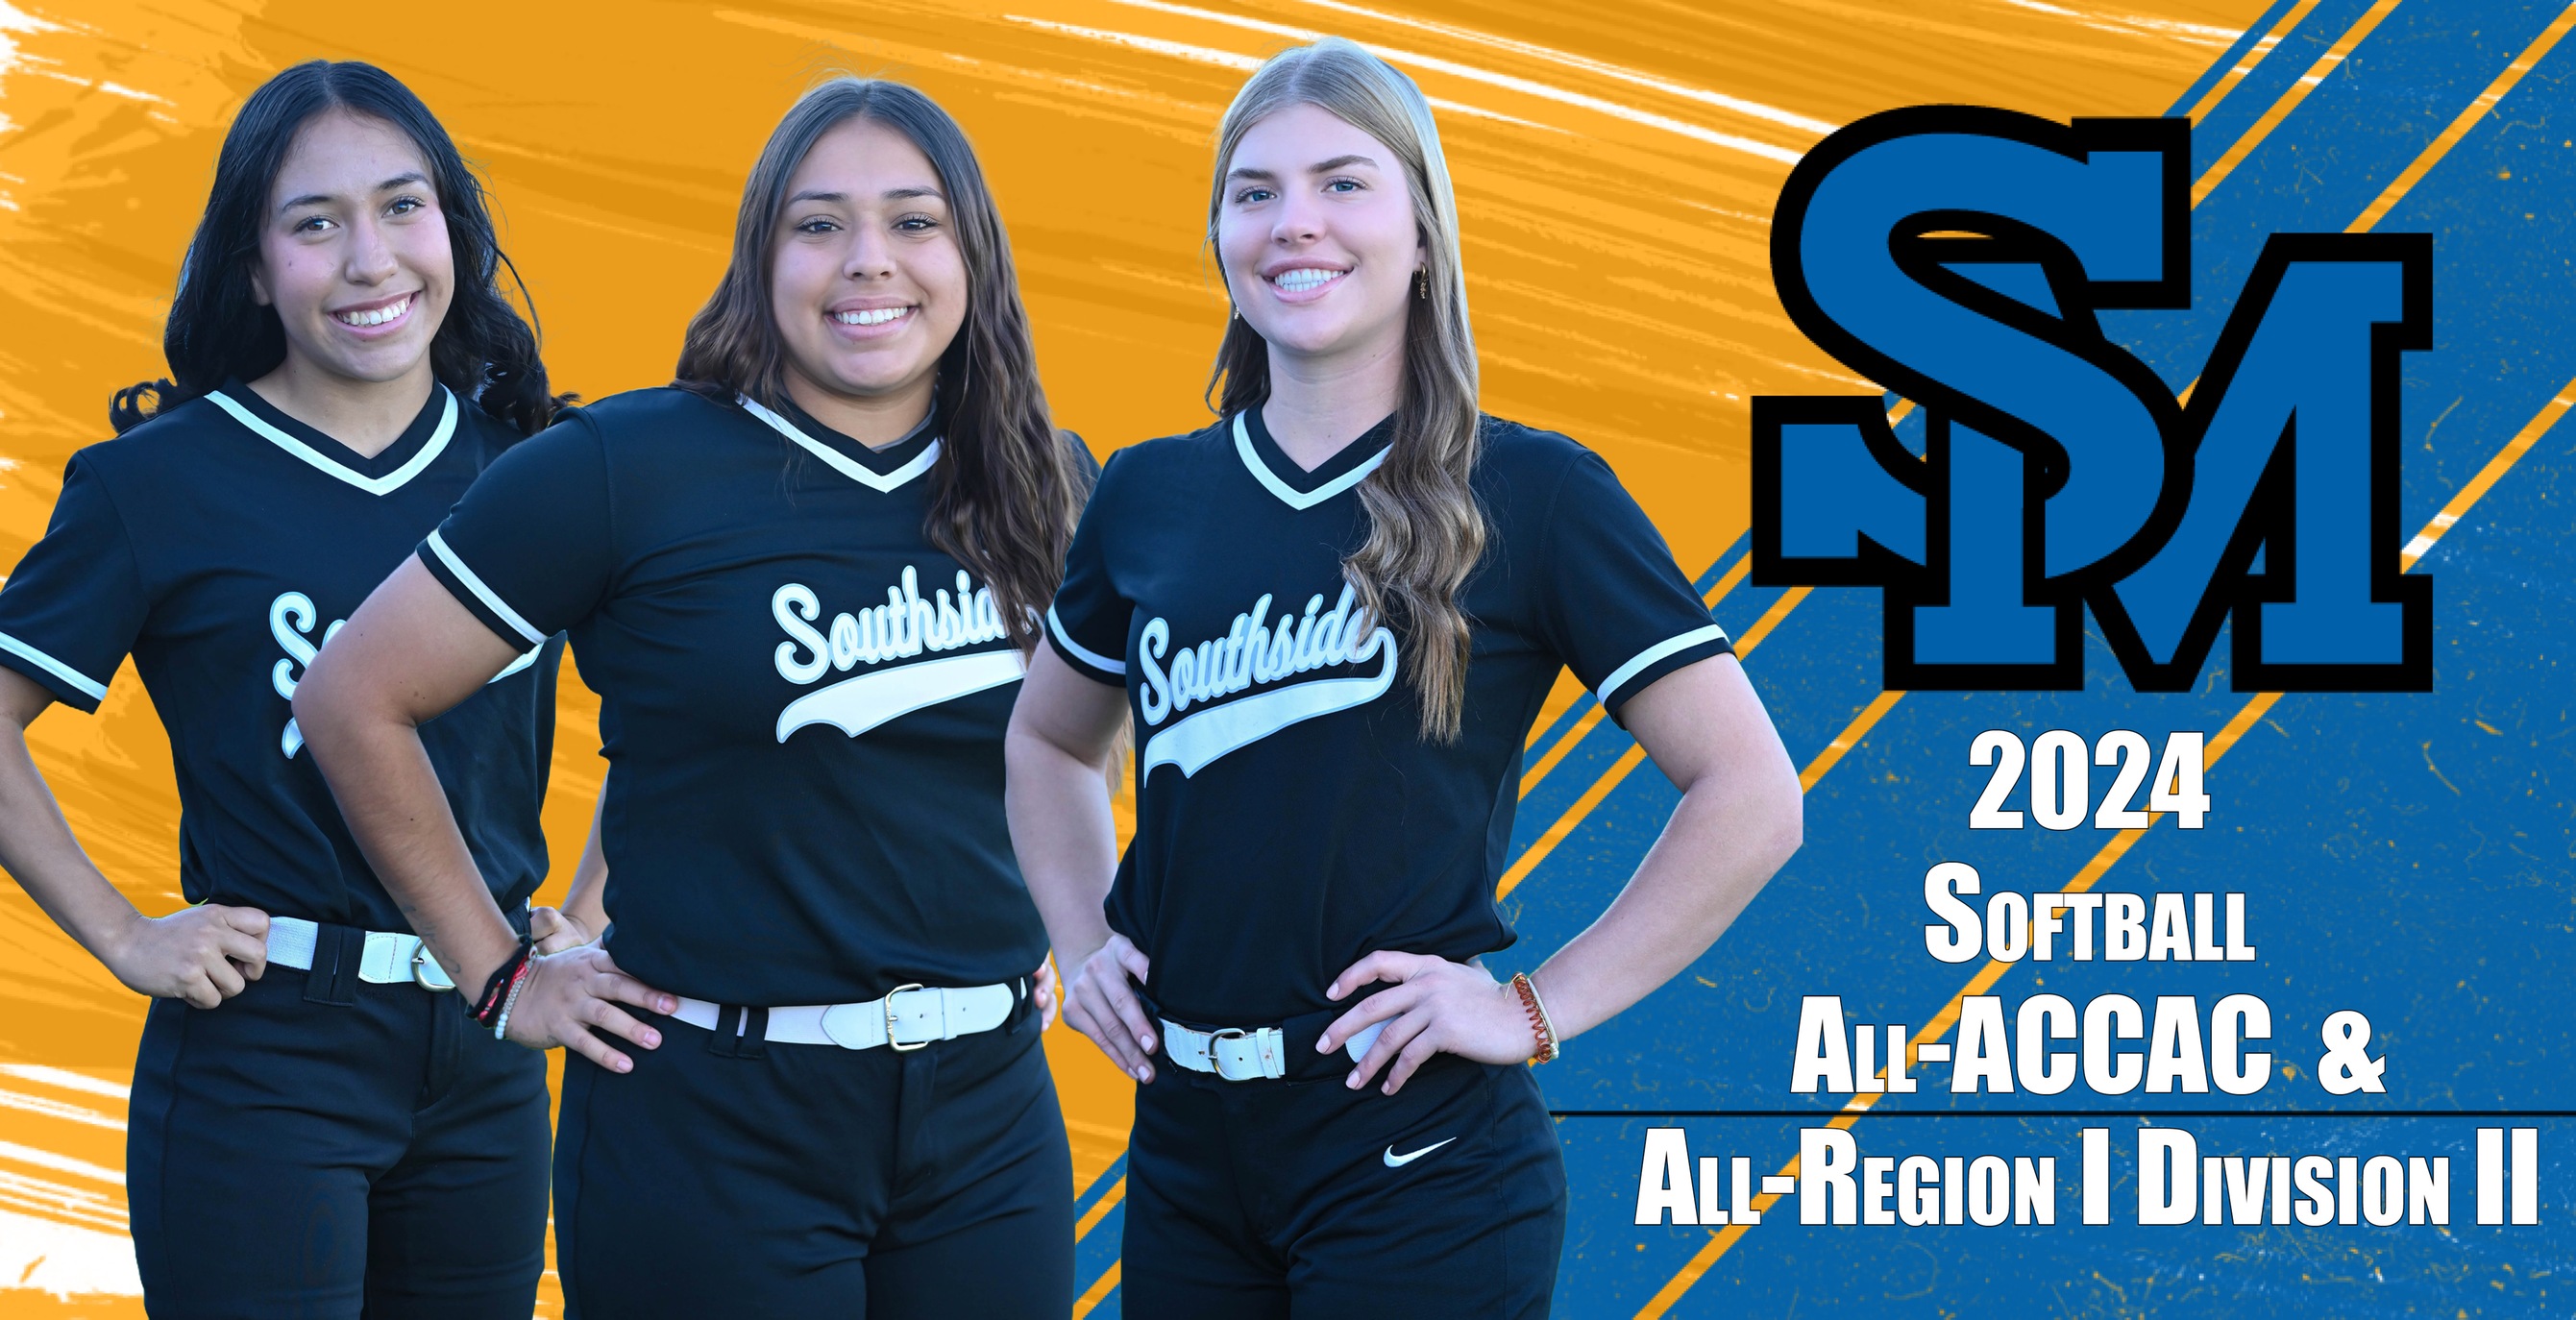 Trio of Cougars Named to 2024 Softball All-ACCAC & All-Region I Teams